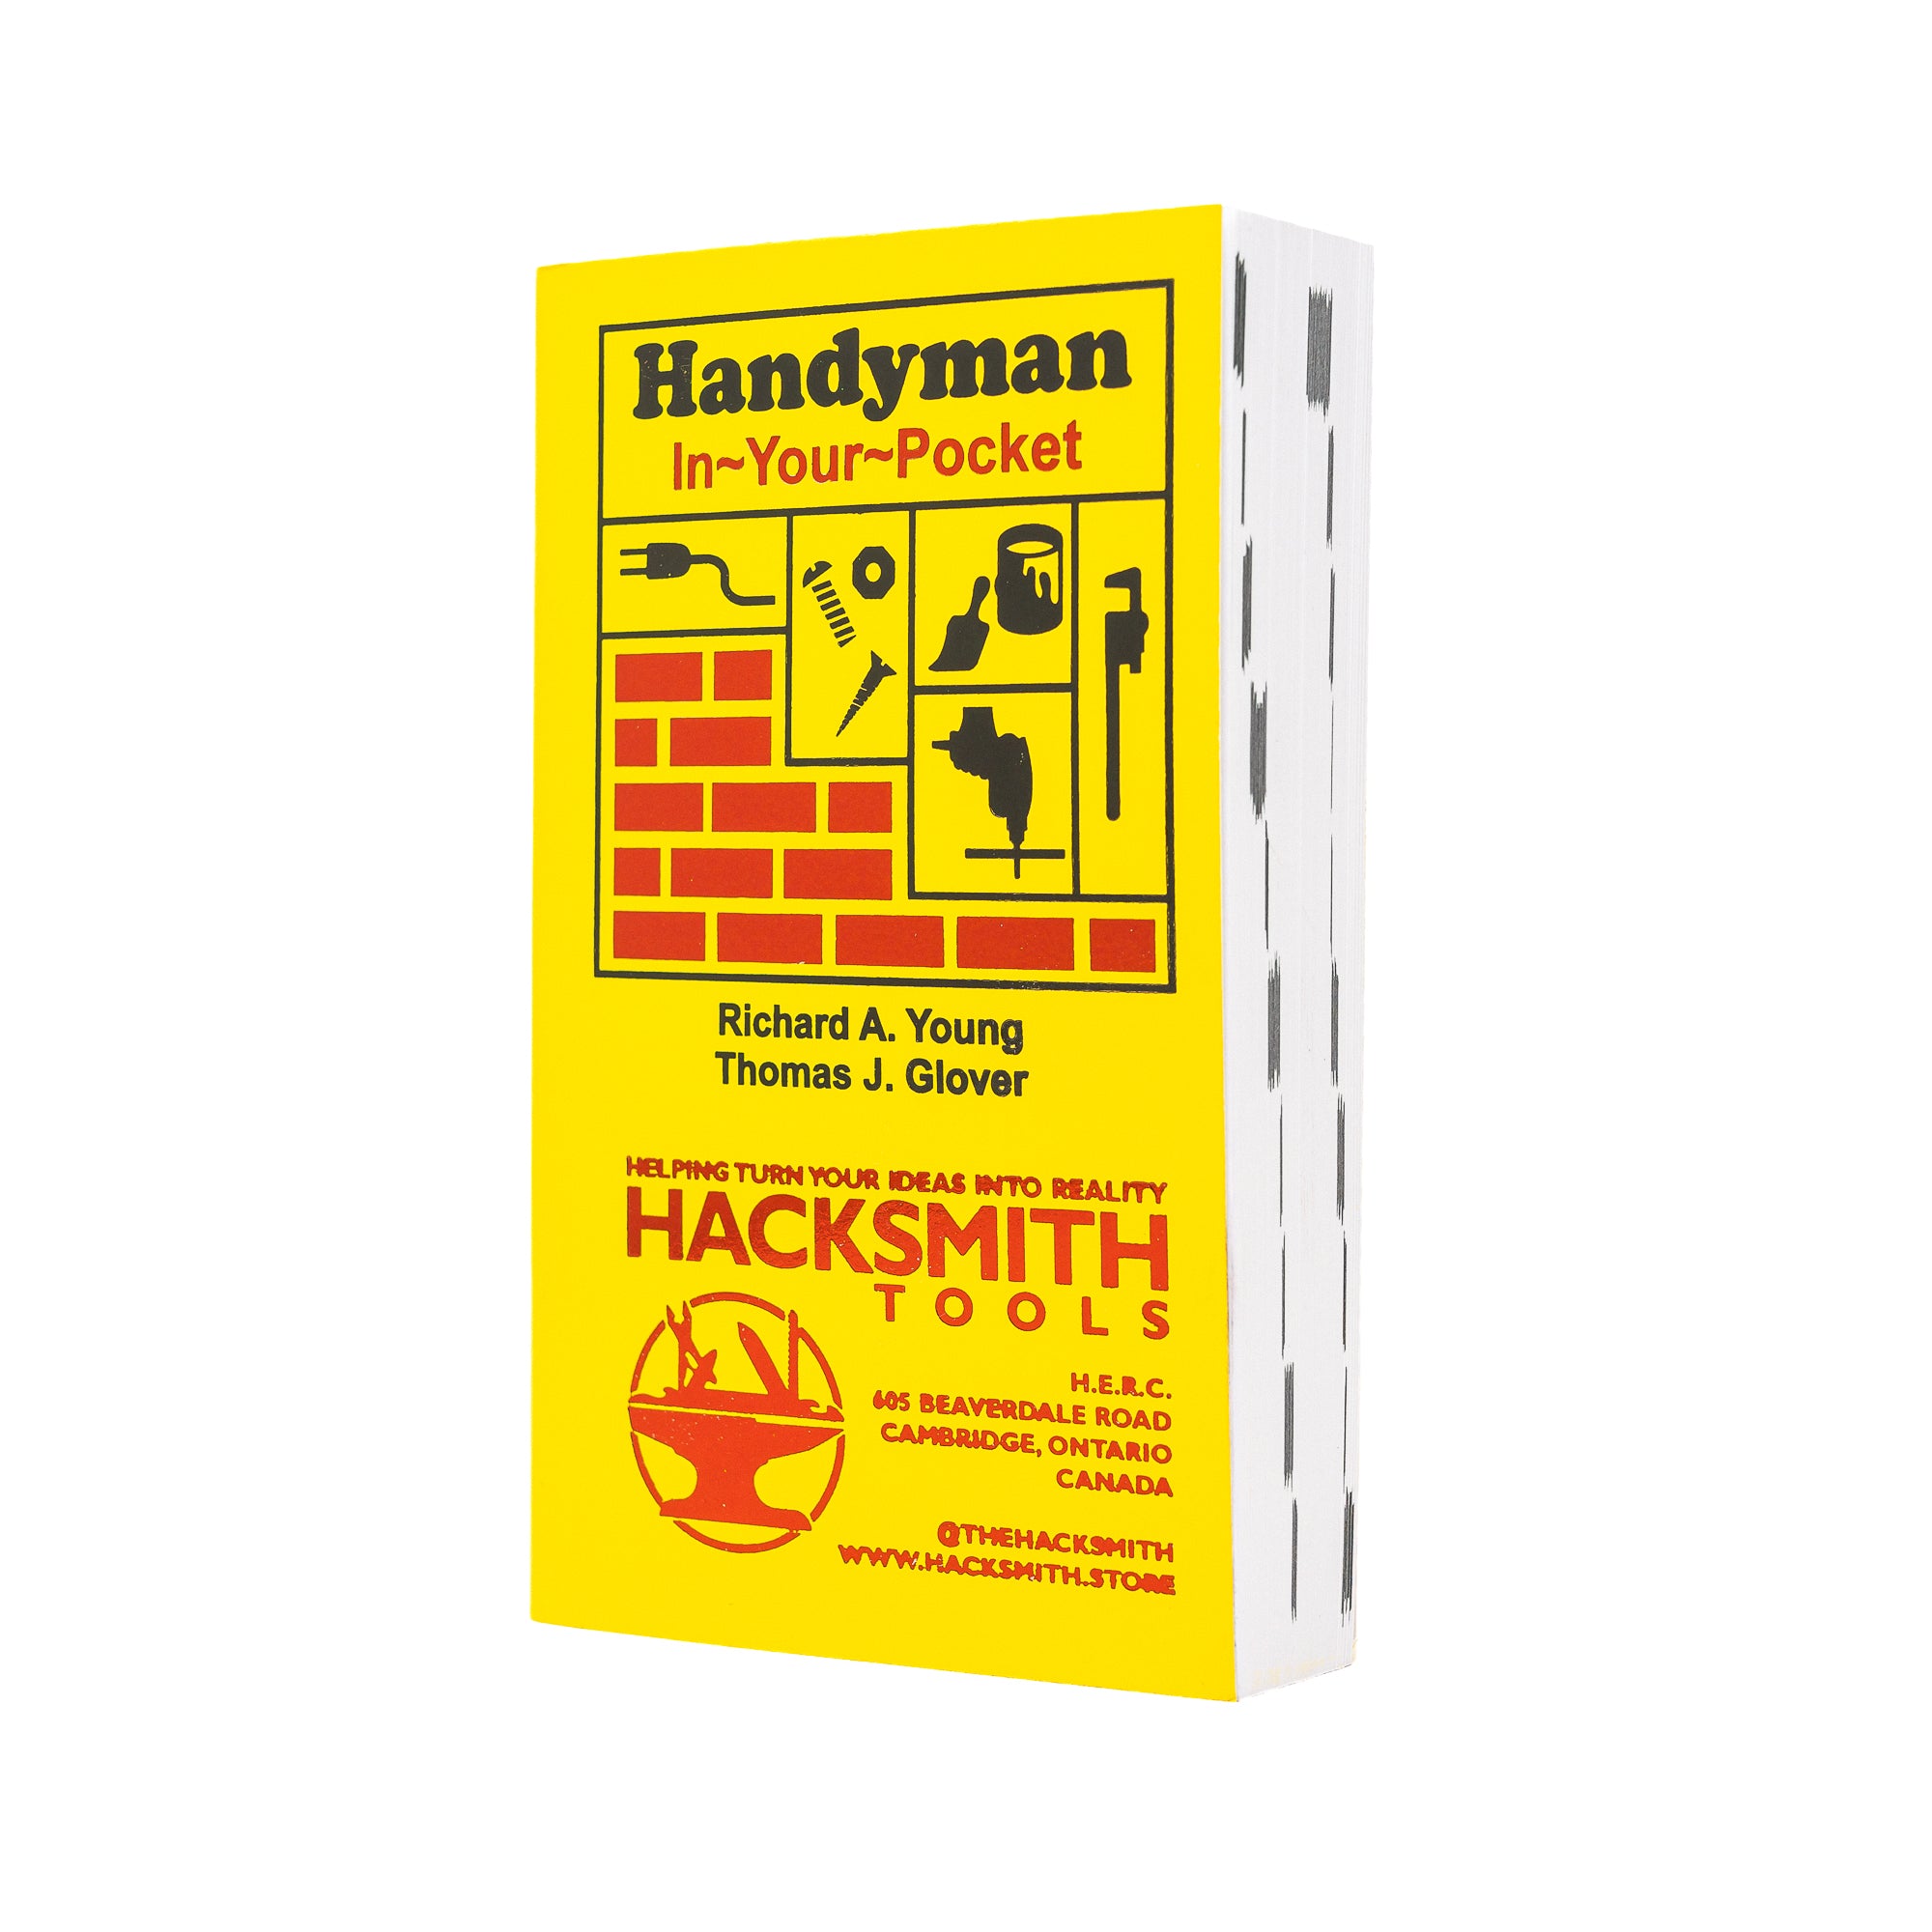 Handyman Pocket Book (1st Edition) By Richard A. Young & Thomas J. Glover - Hacksmith.store